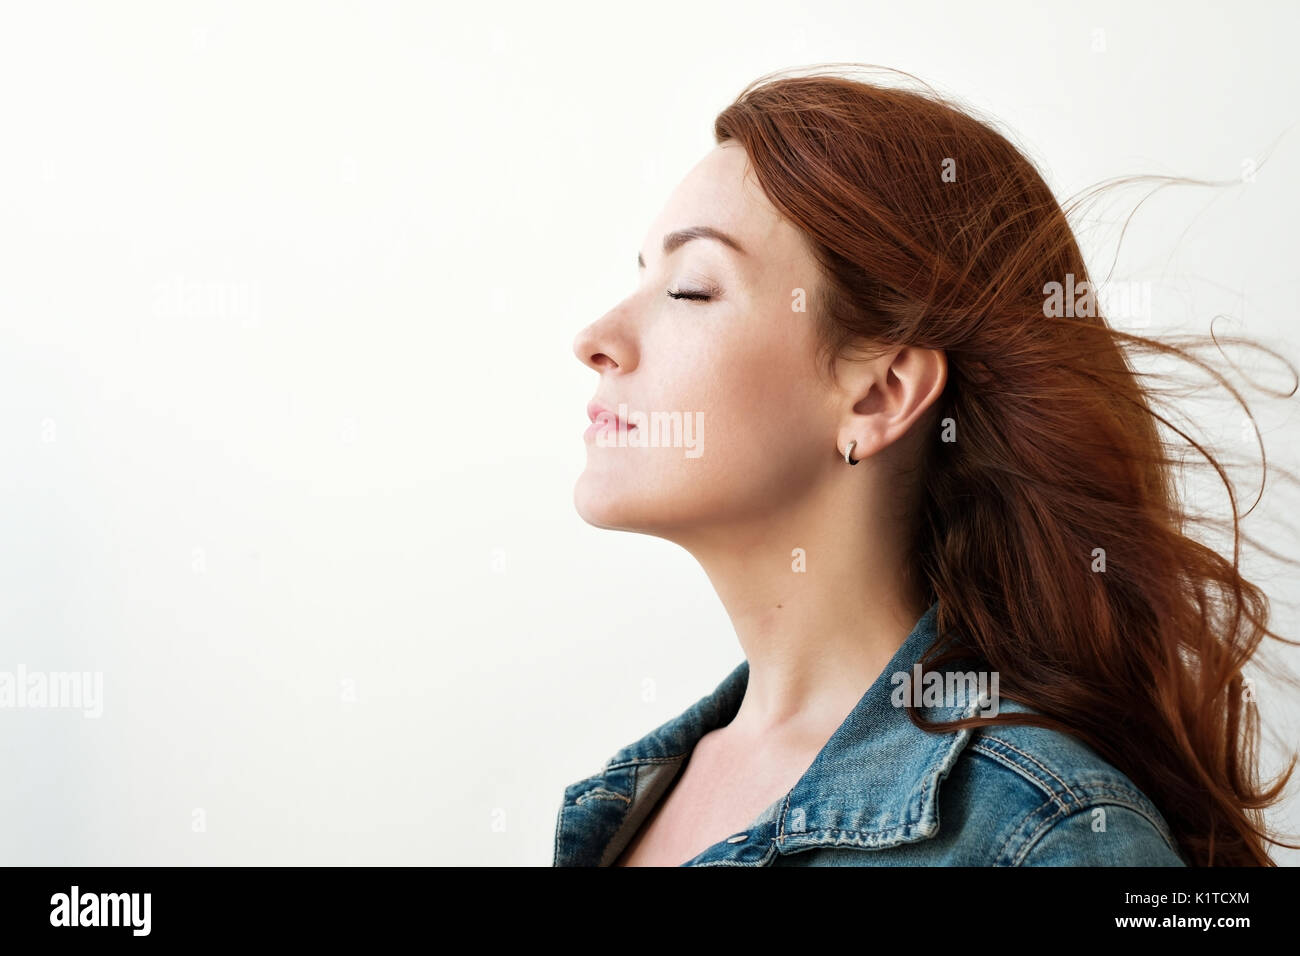 Portrait of a beautiful red-haired woman. She looks away in an inspired way, dreaming about something. Stock Photo